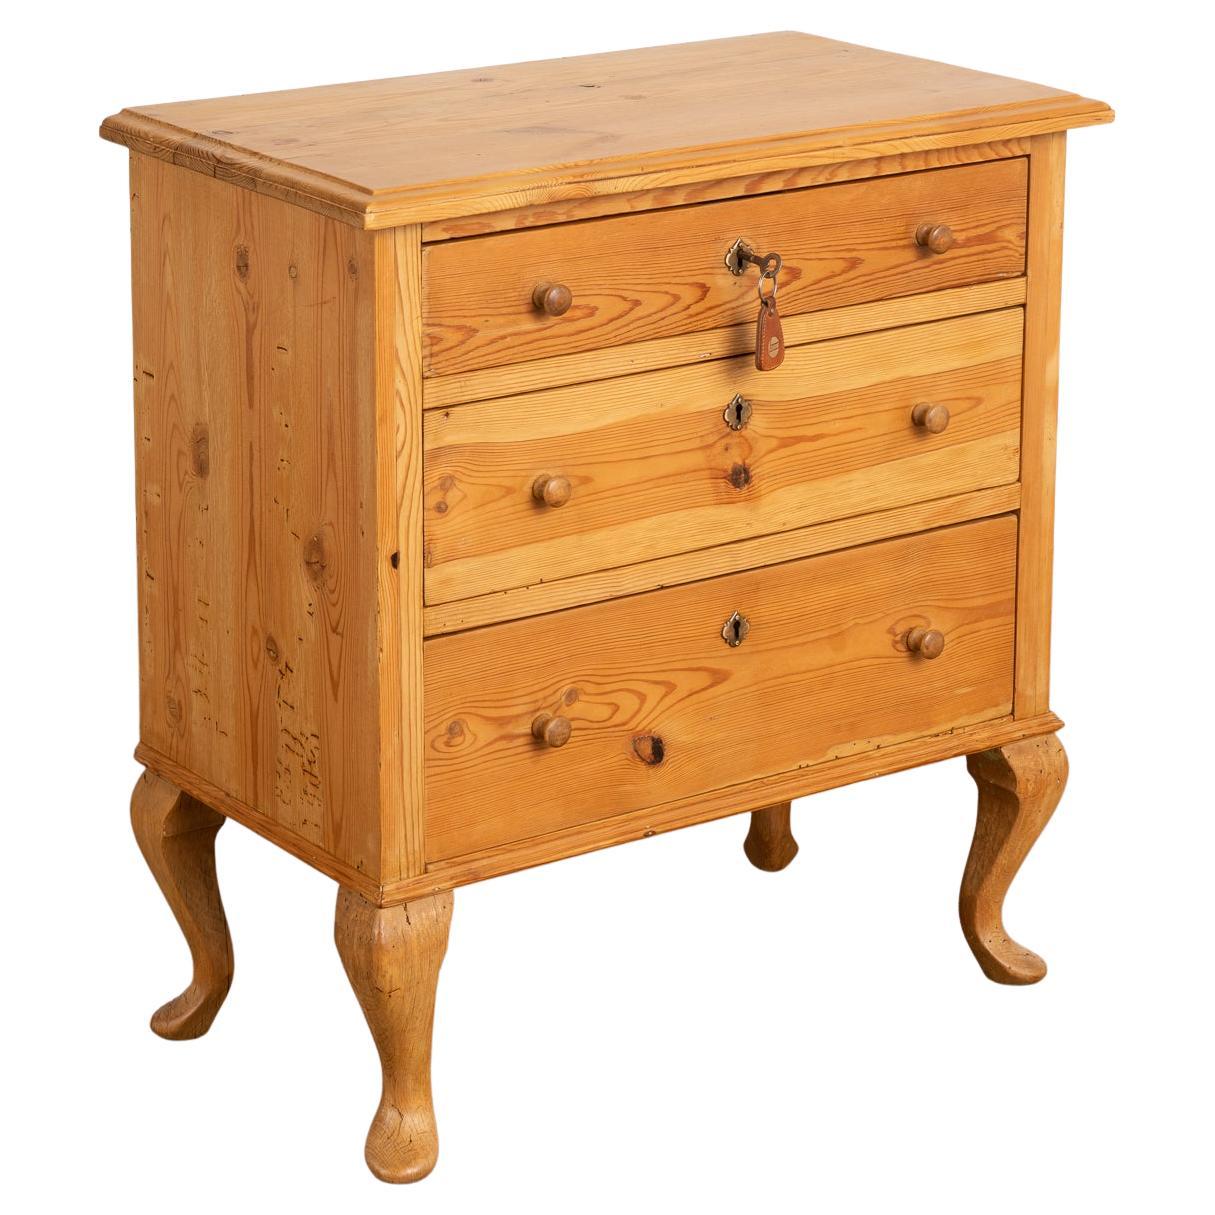 Antique Pine Nightstand Small Chest of Drawers, Denmark, circa 1940